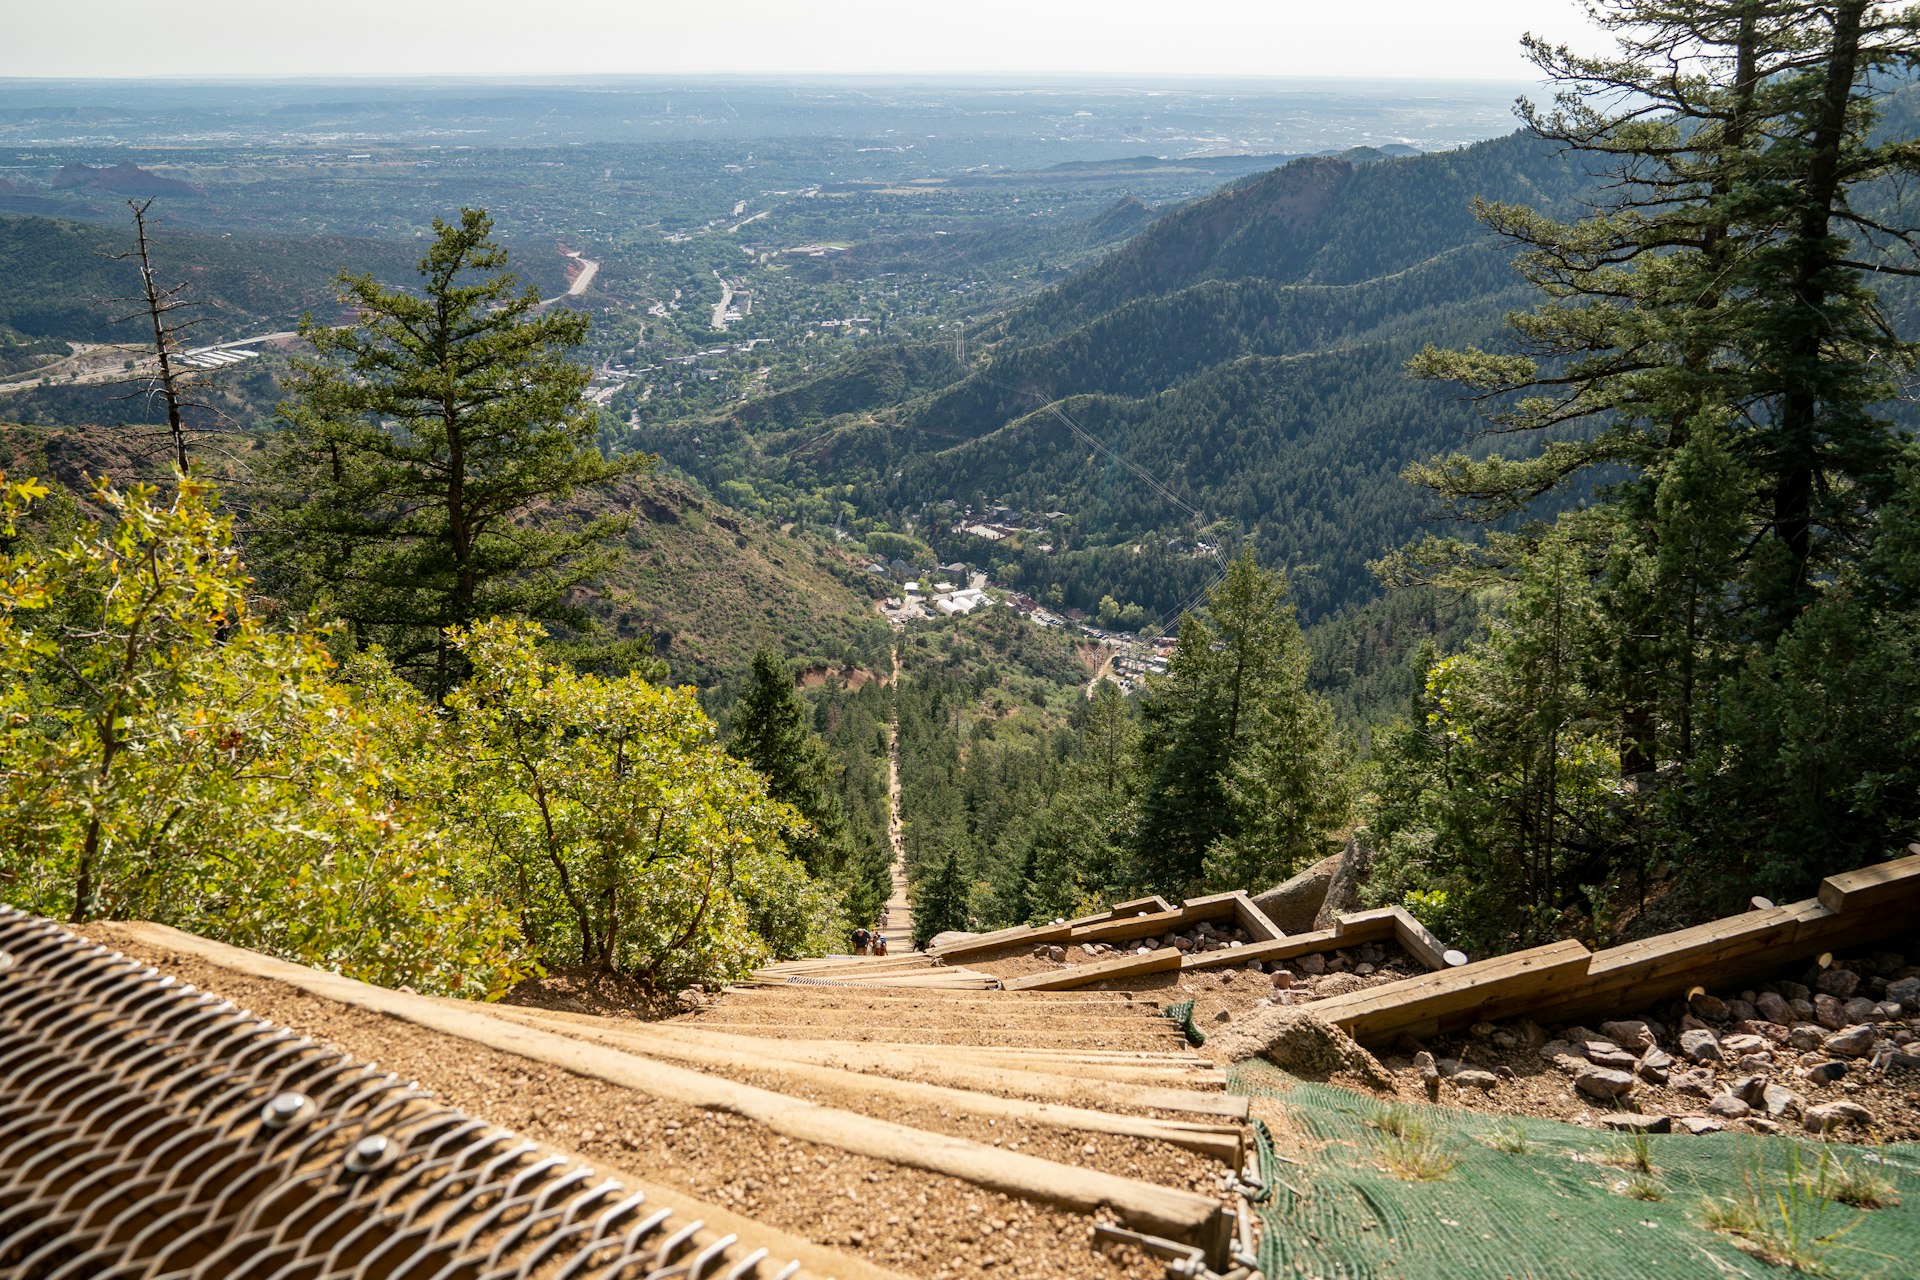 A look down at the old railroad ties making up the steep Manitou Incline, mountains in the distance